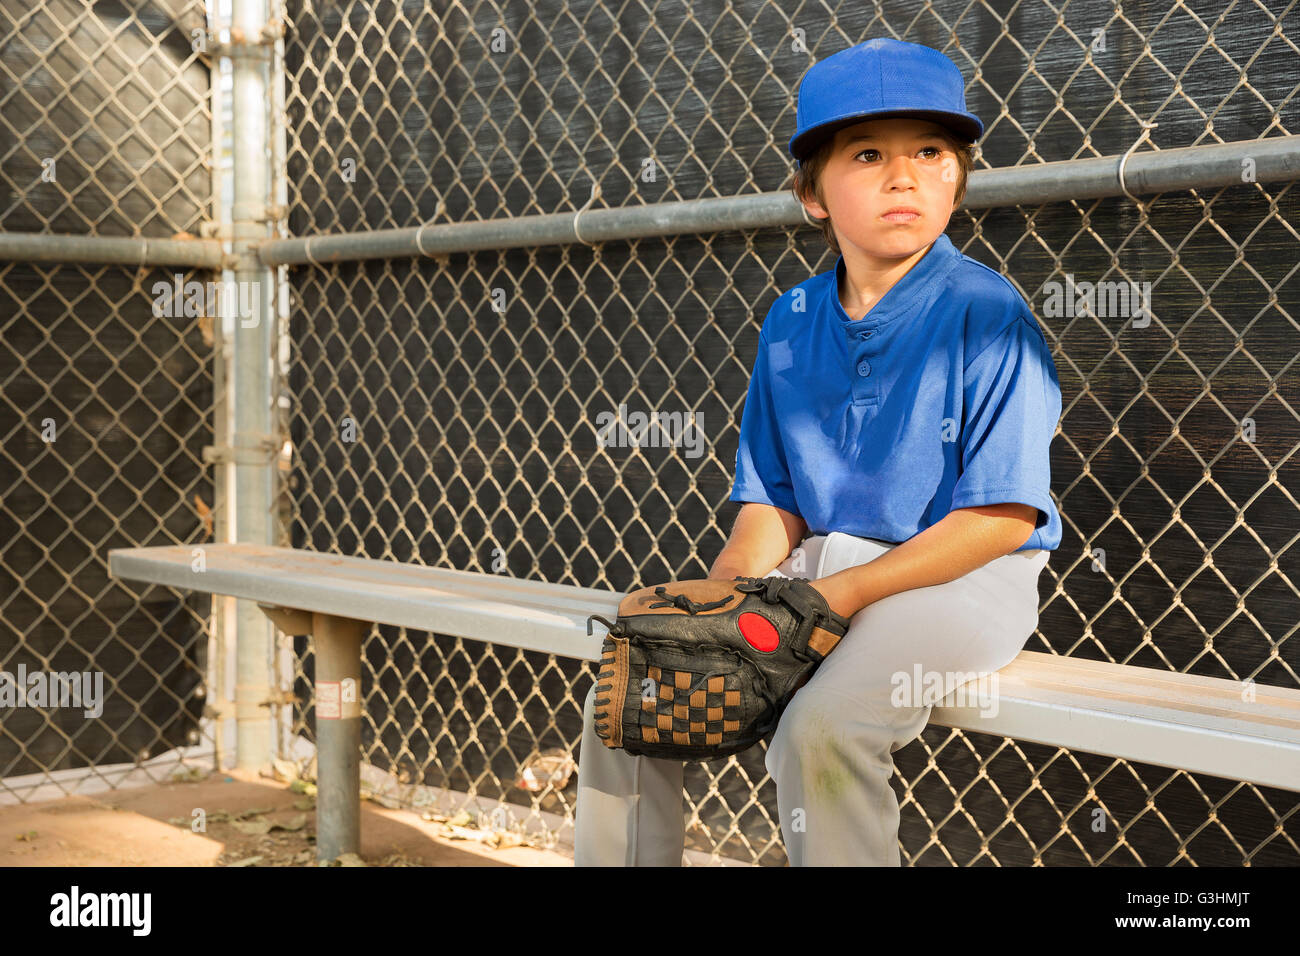 Boy watching from bench at baseball practise Stock Photo